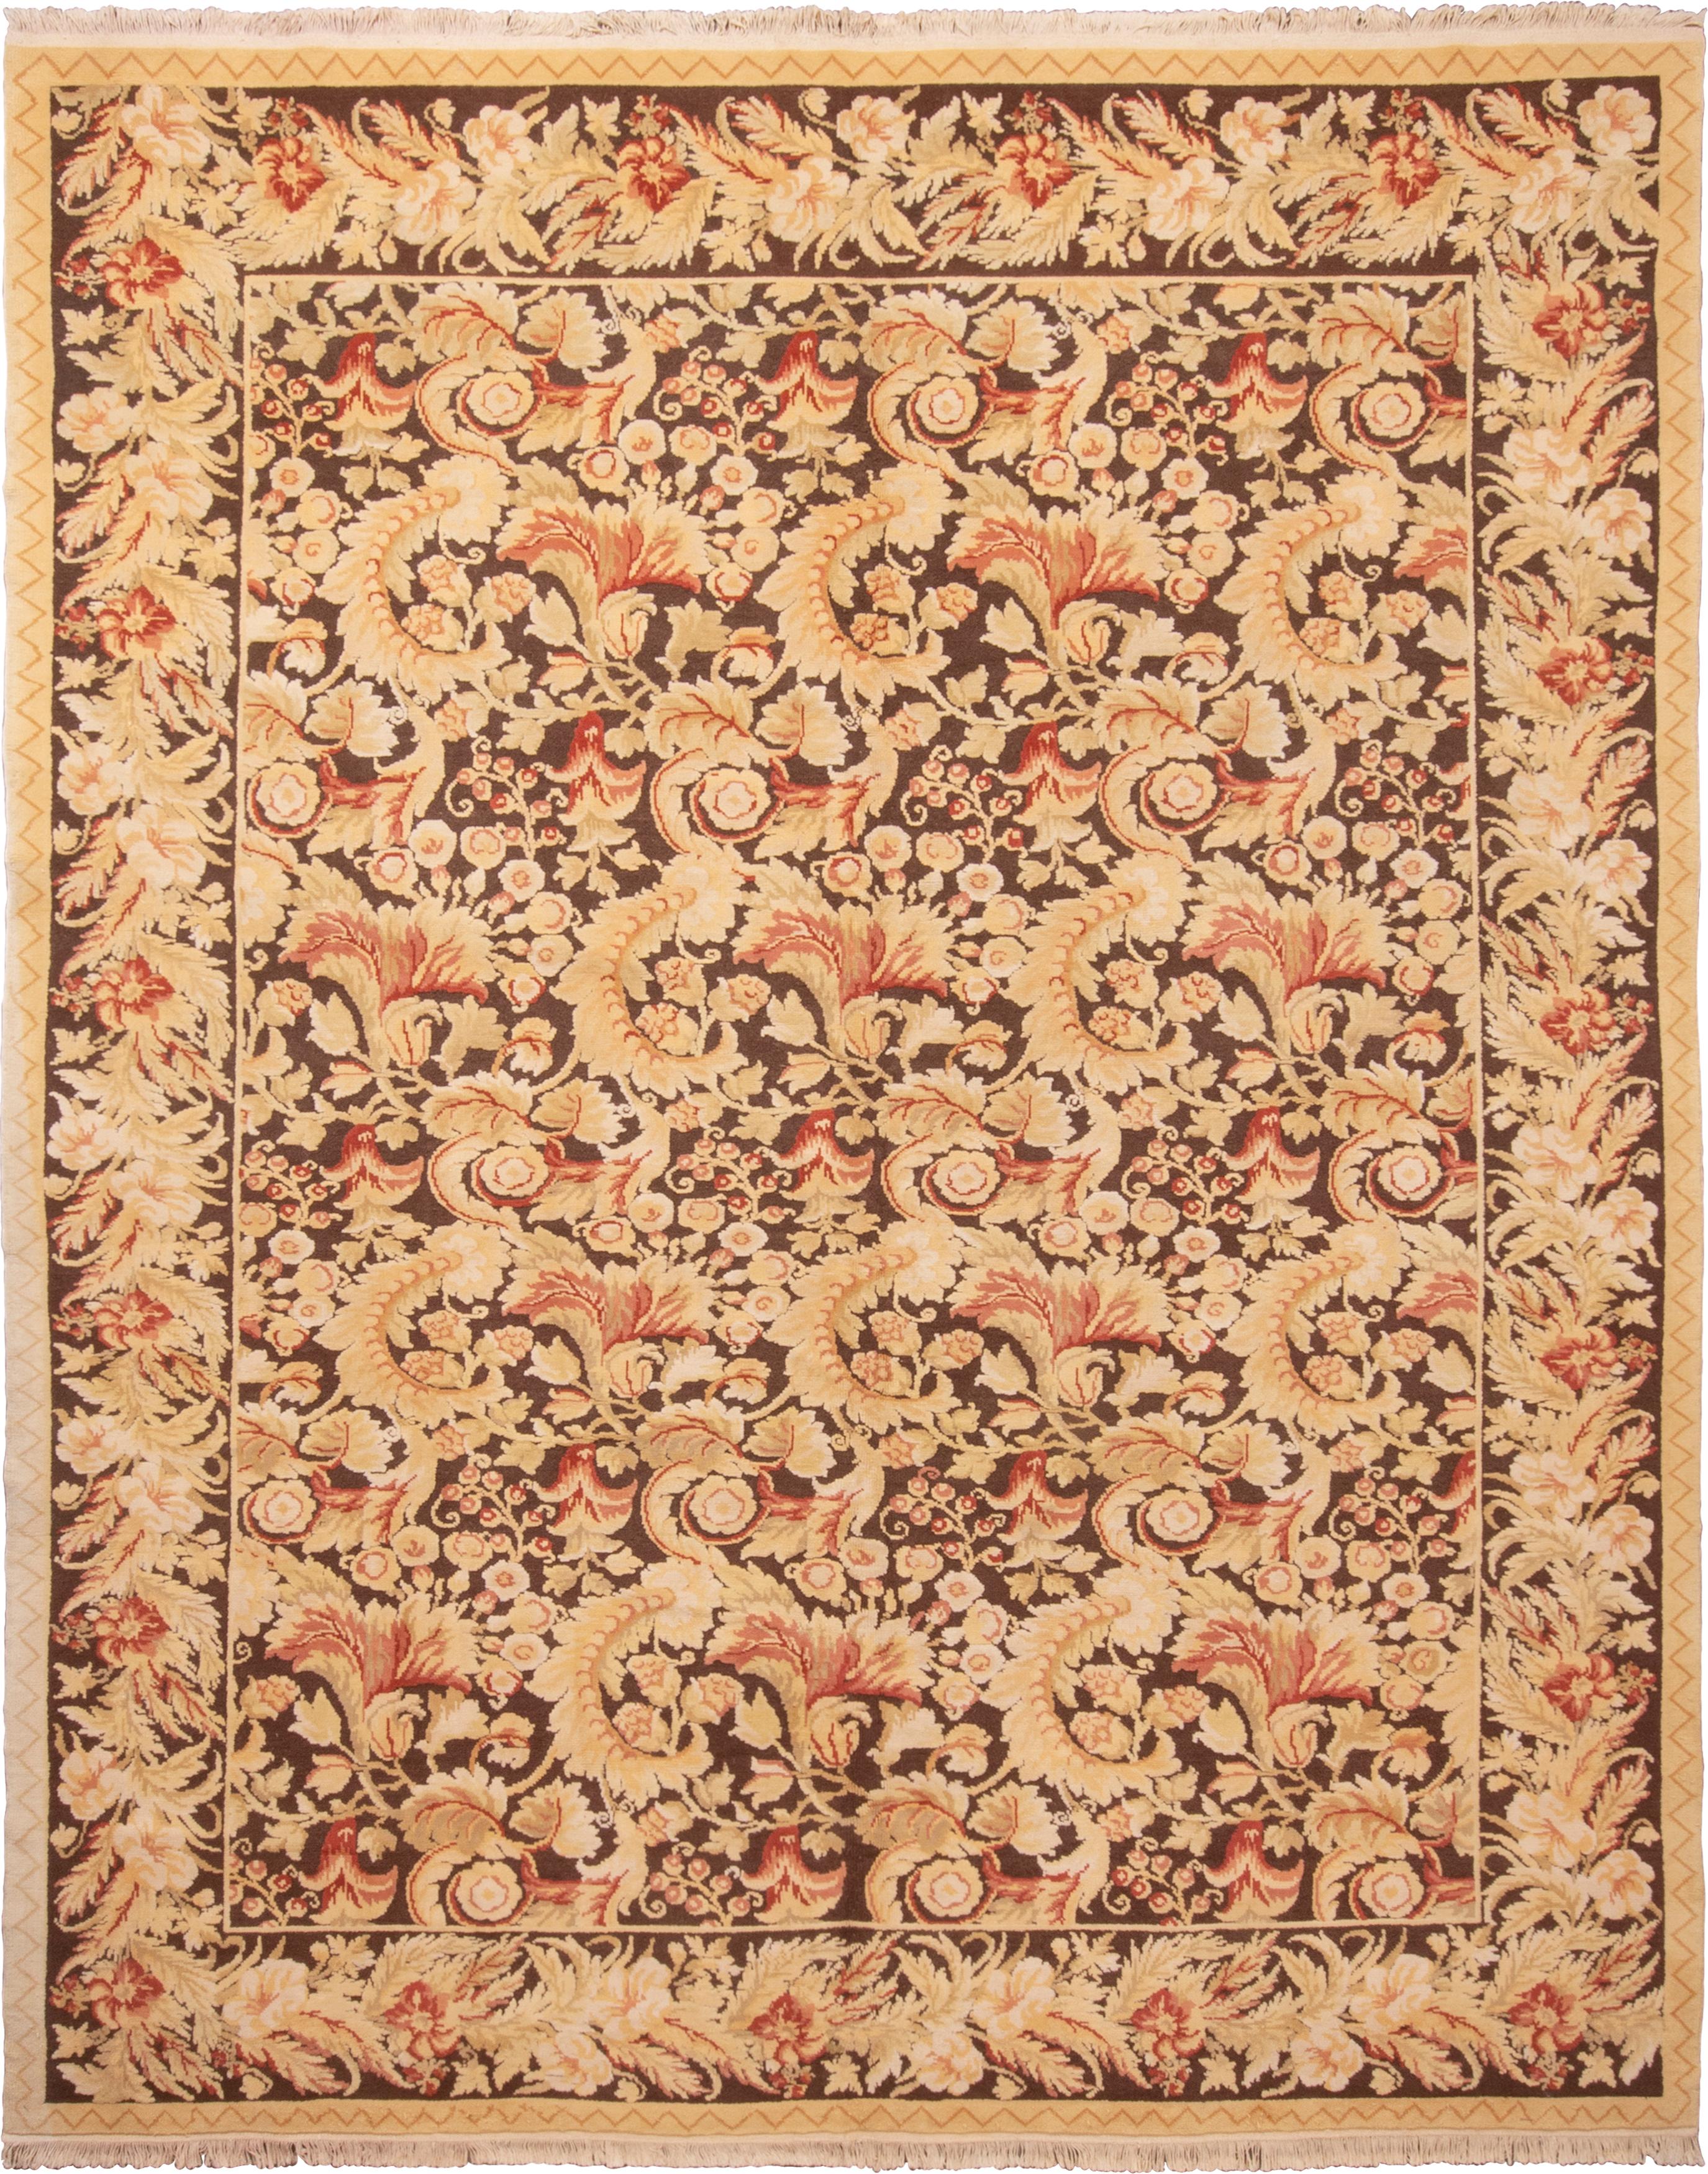 Originating from China, this transitional wool rug enjoys a modern interpretation of an 18th century design. Hand knotted in high-quality wool, the all-over field design distinctly resembles the neoclassical golden-beige, brown, and pink colorways